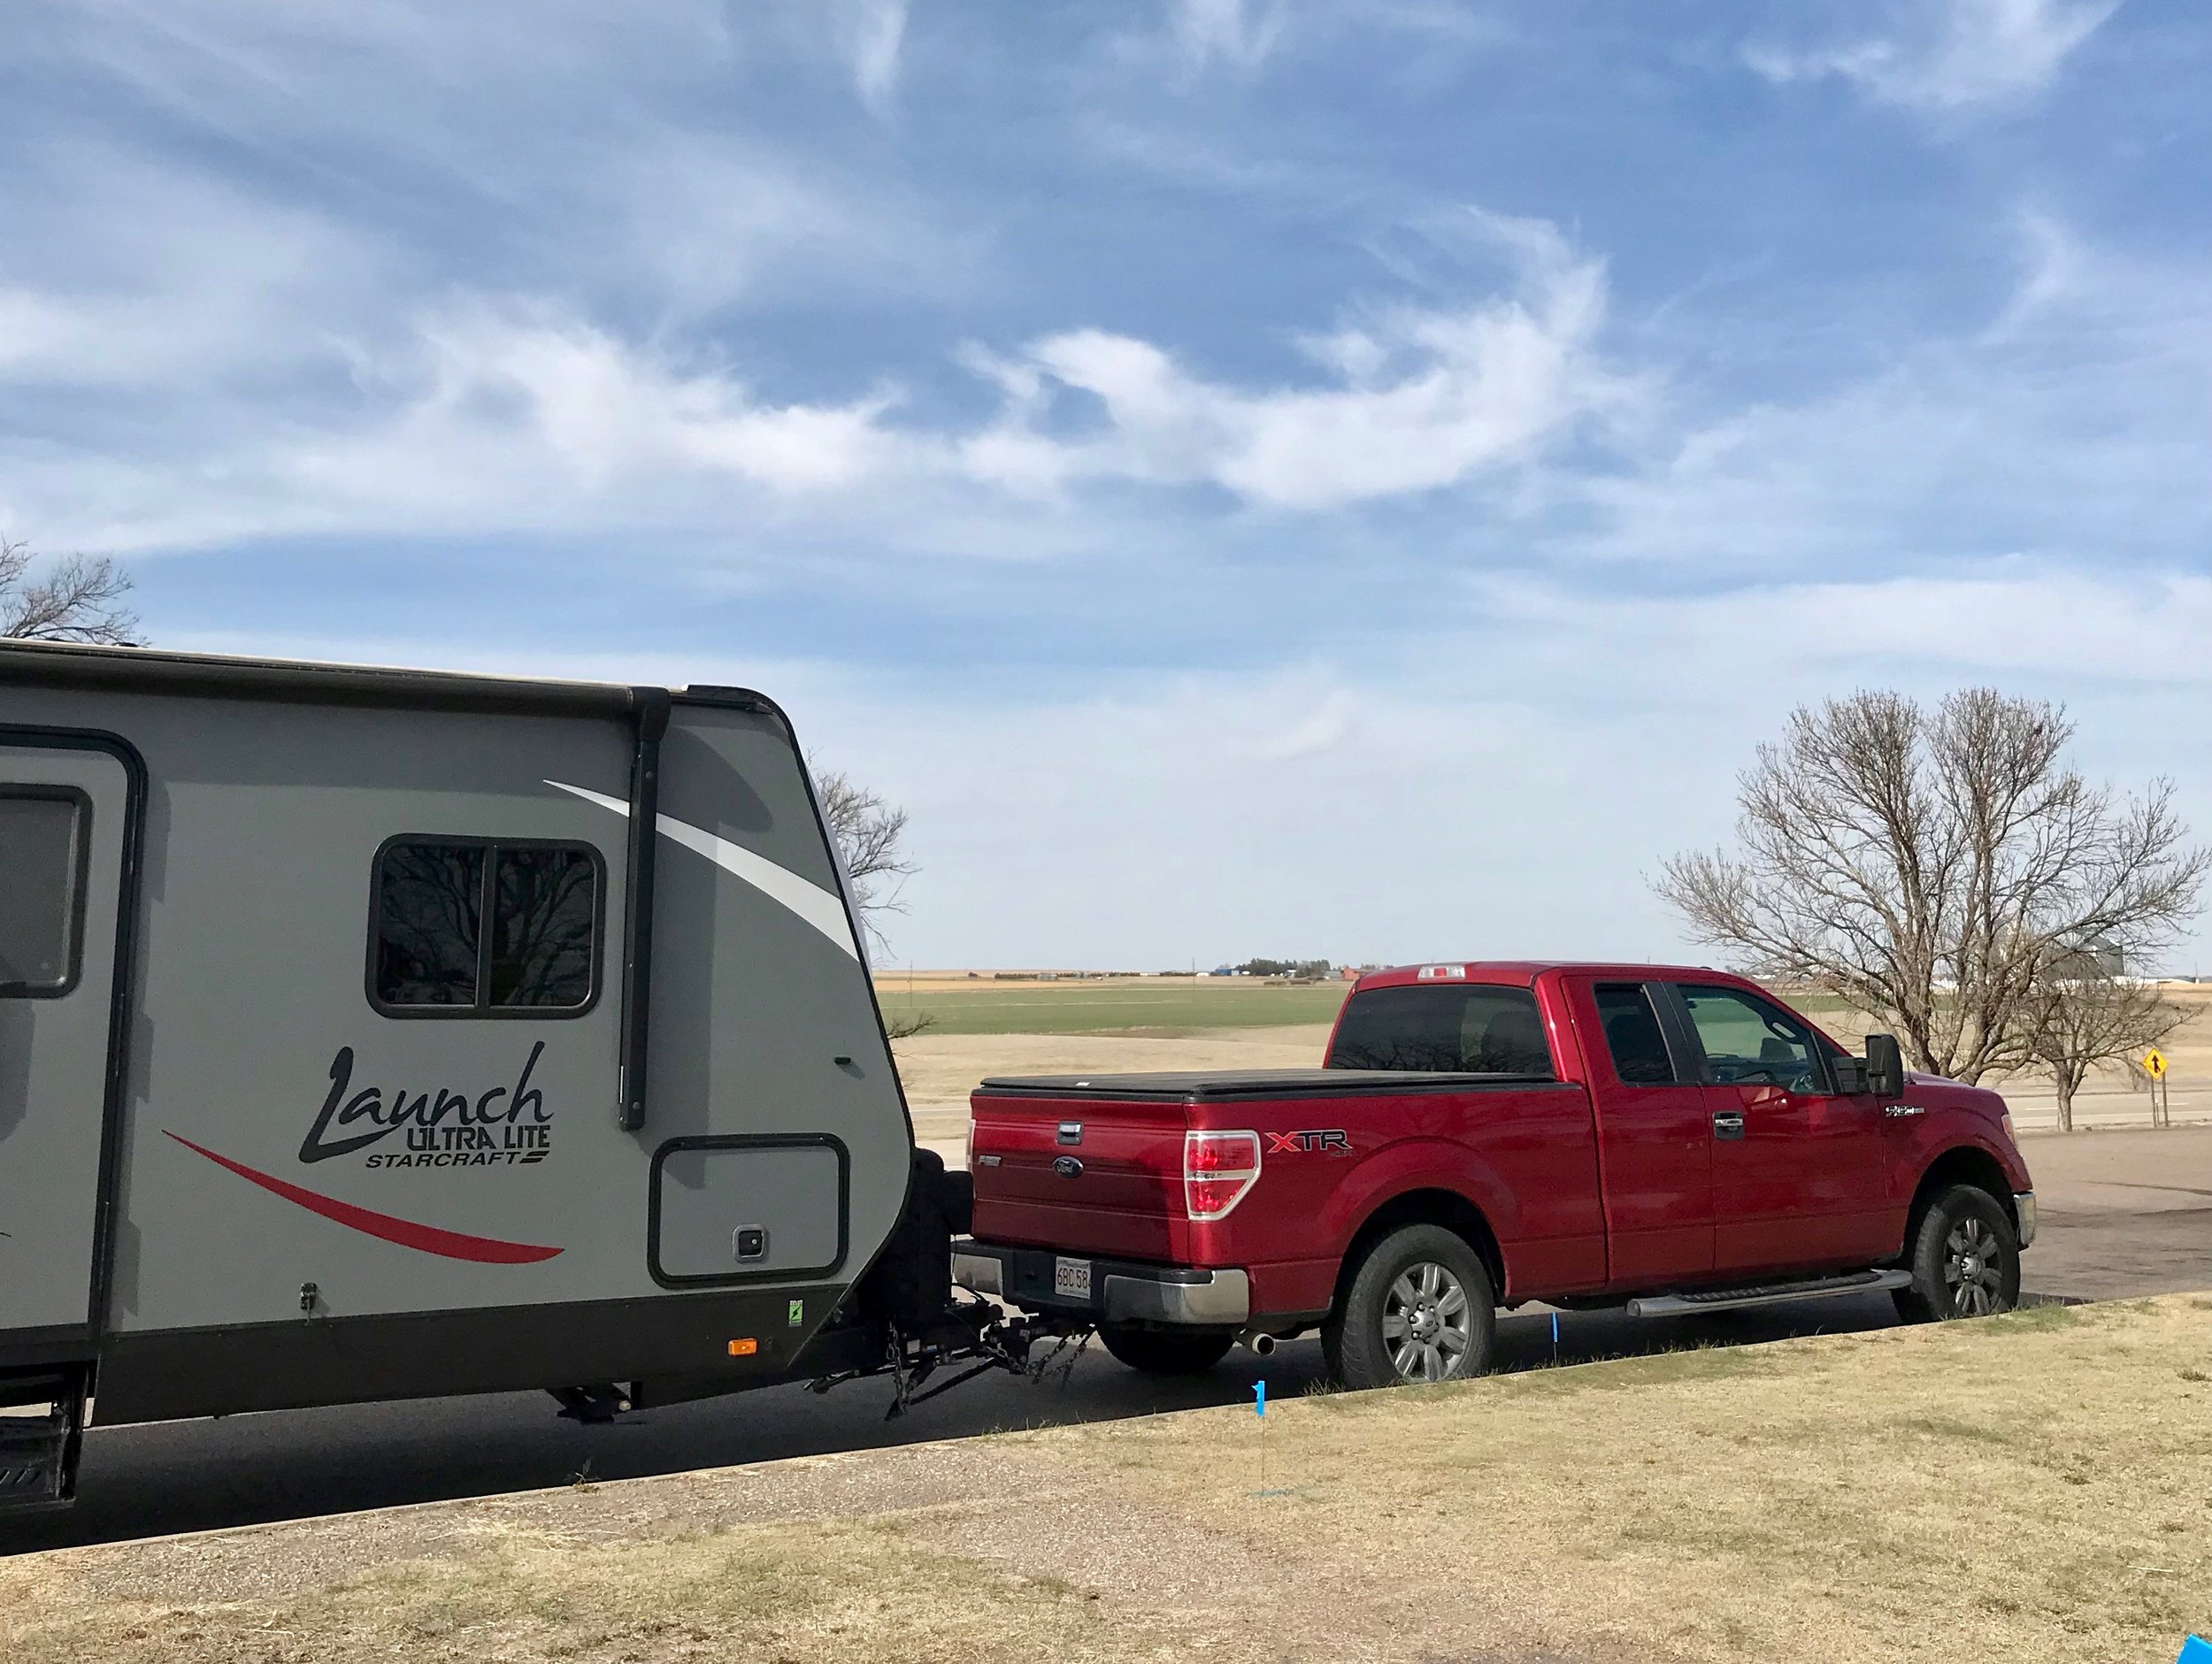  The writer's truck and trailer, on the flatlands of Kansas.      